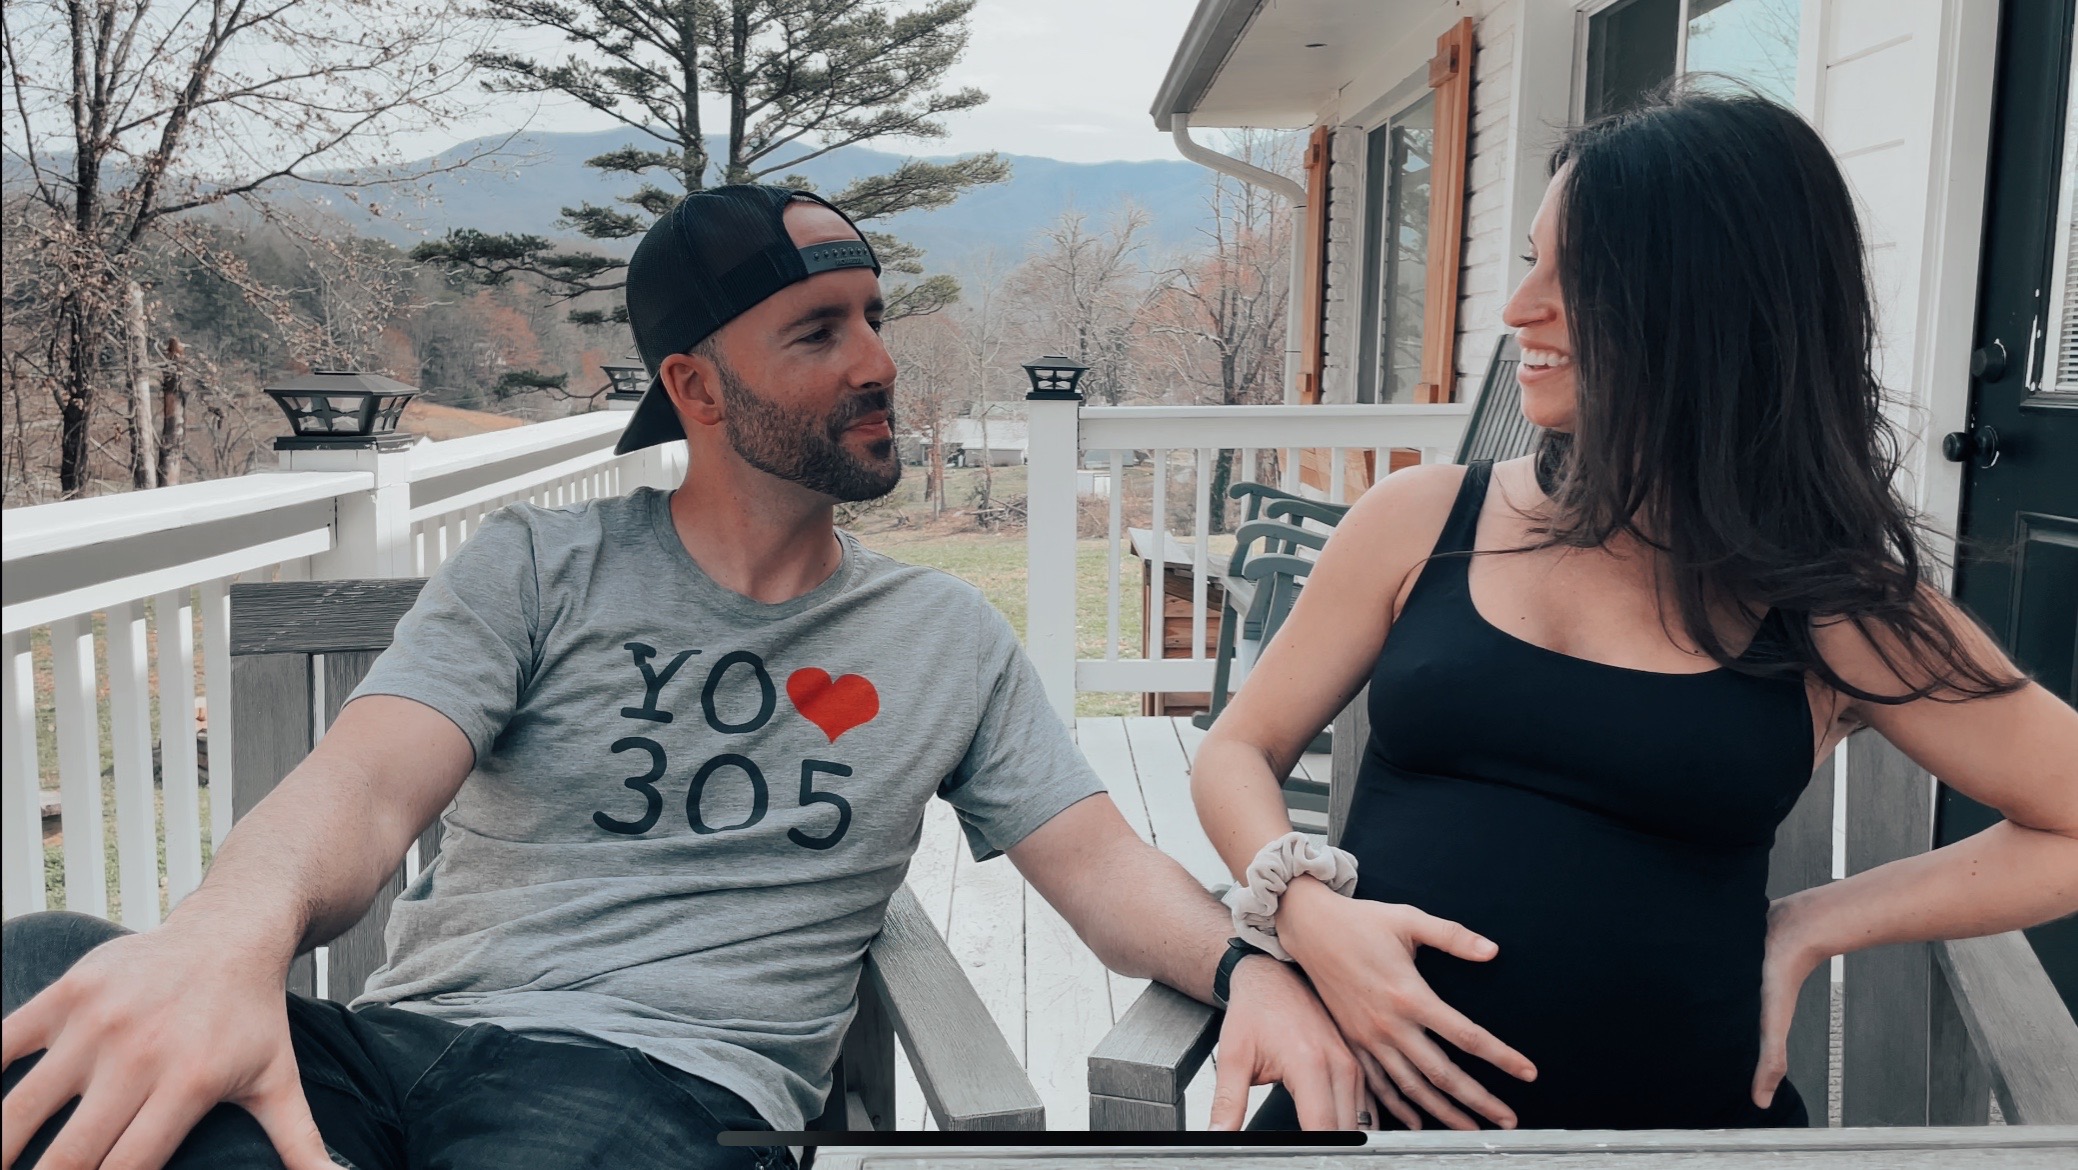 An update from us! Exciting news & new life direction!